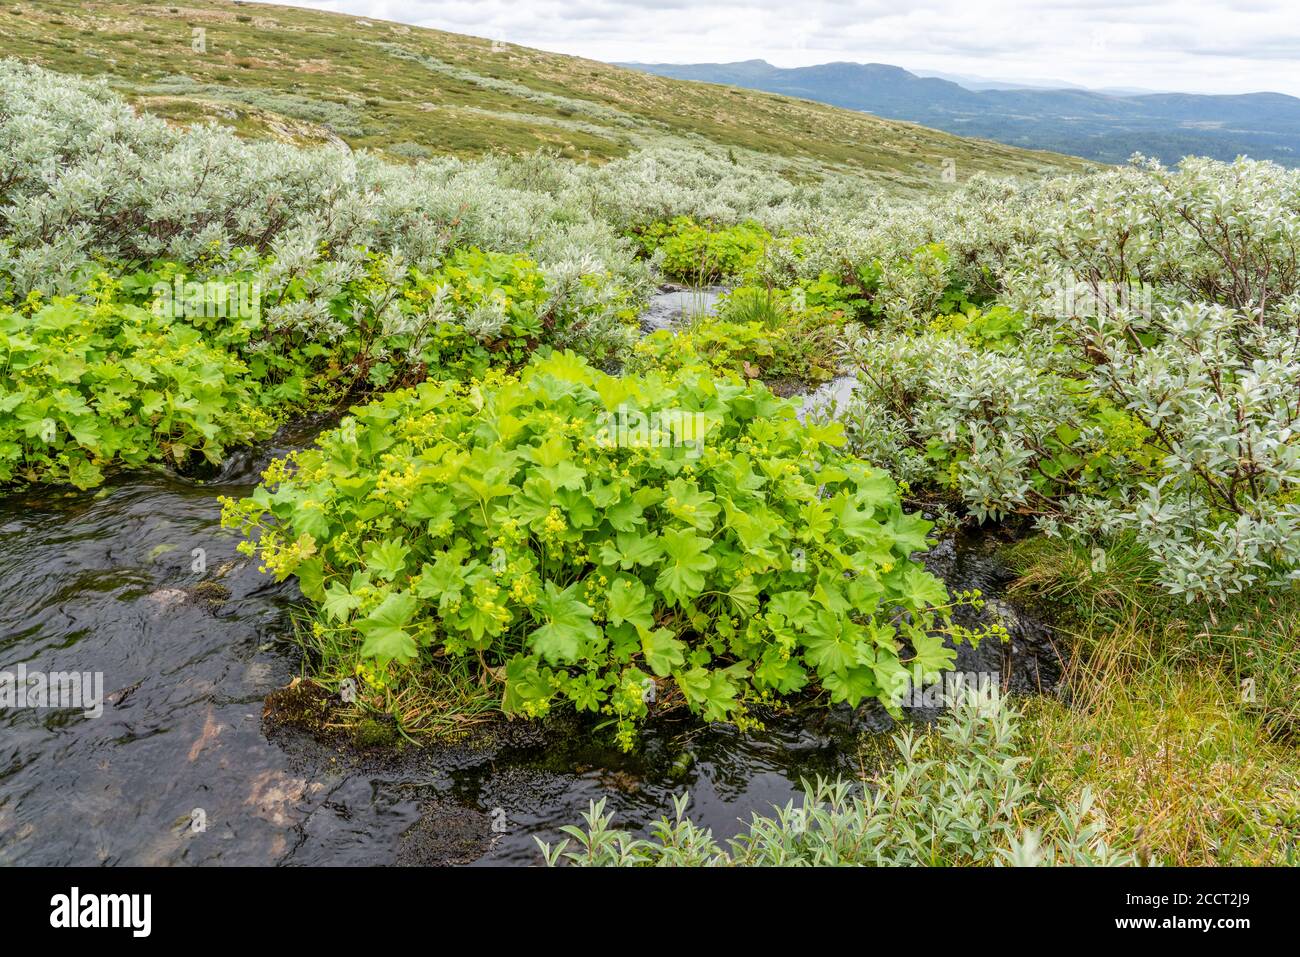 Lady's mantle Alchemilla mollis thriving in an upland stream at 1200m alongside dwarf willow (Salix) in open moorland near Lenningen Central Norway Stock Photo